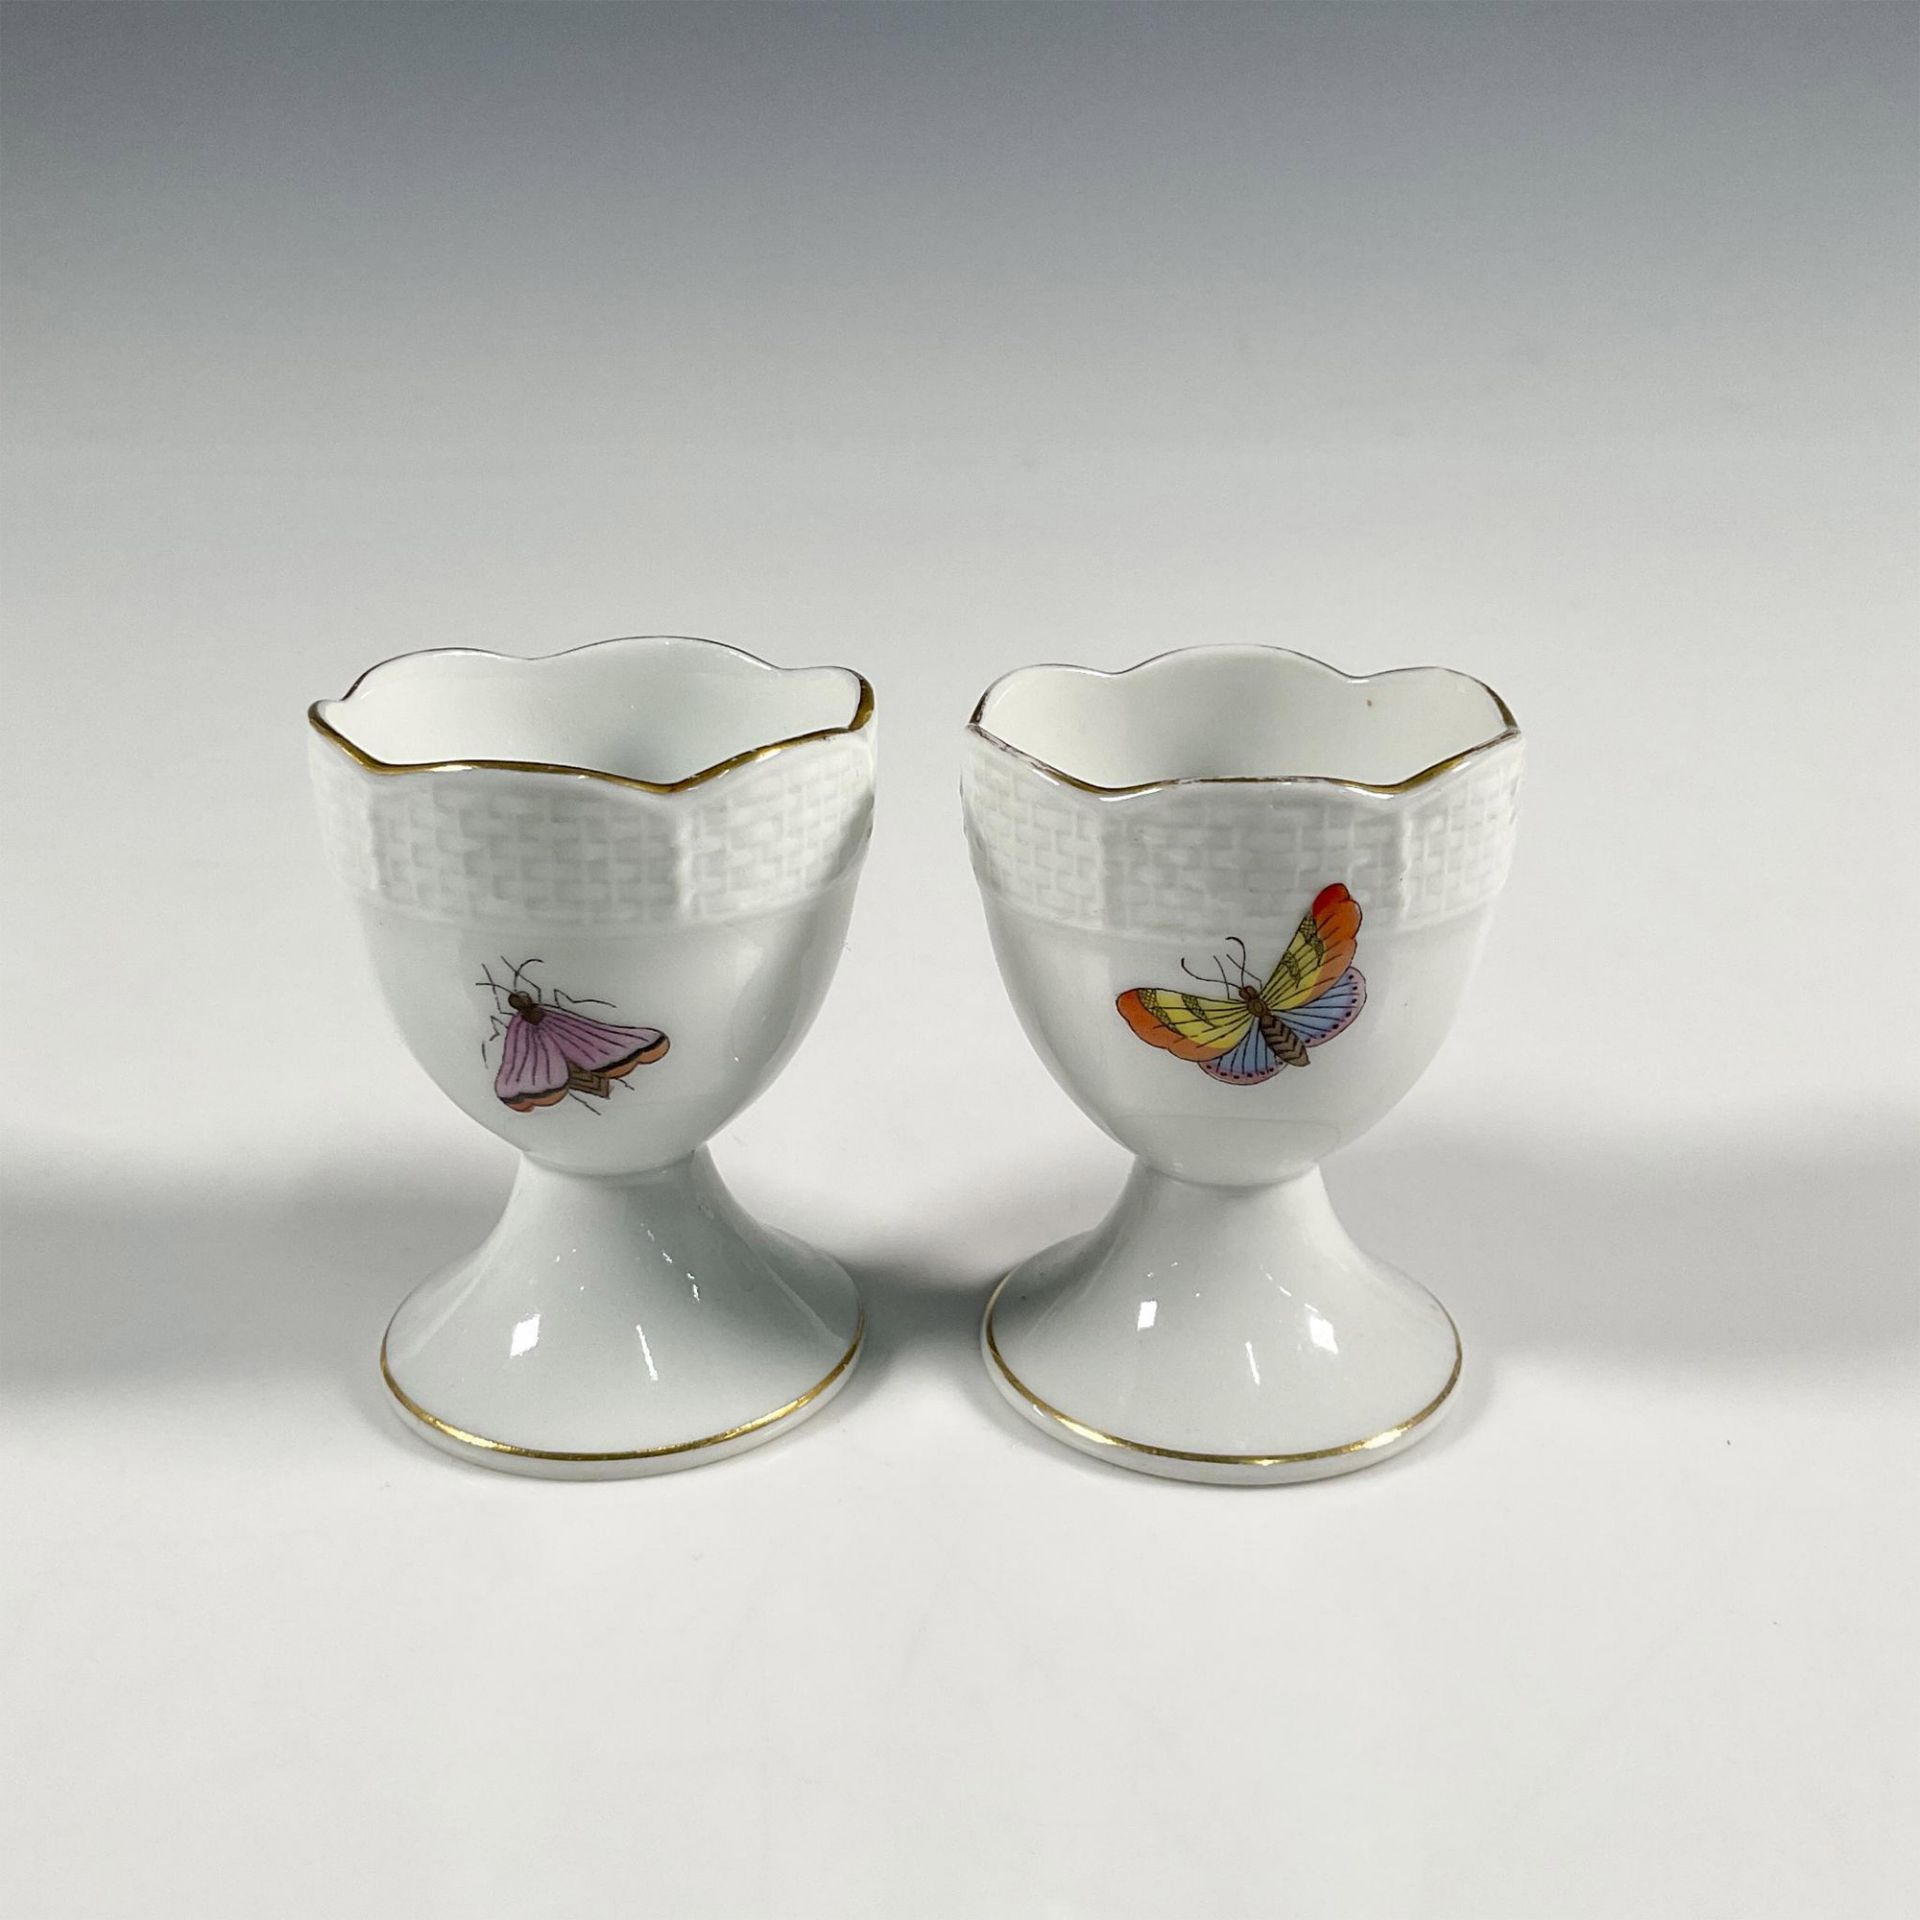 Pair of Herend Porcelain Egg Cups with Bird Motif - Image 2 of 3